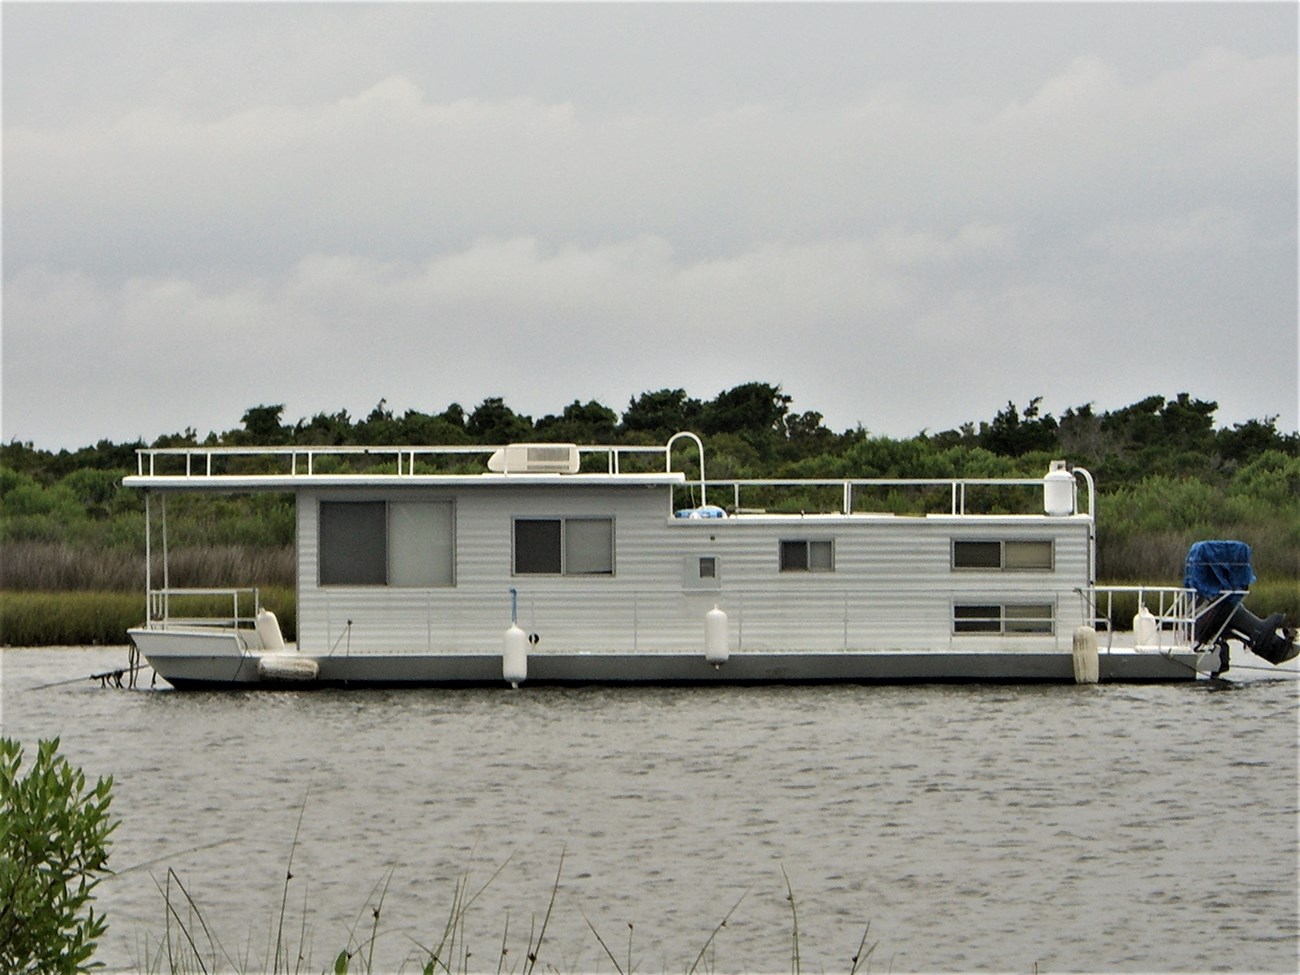 A houseboat anchors in between the marsh. Trees are behind the boat. Tall grass is in the foreground